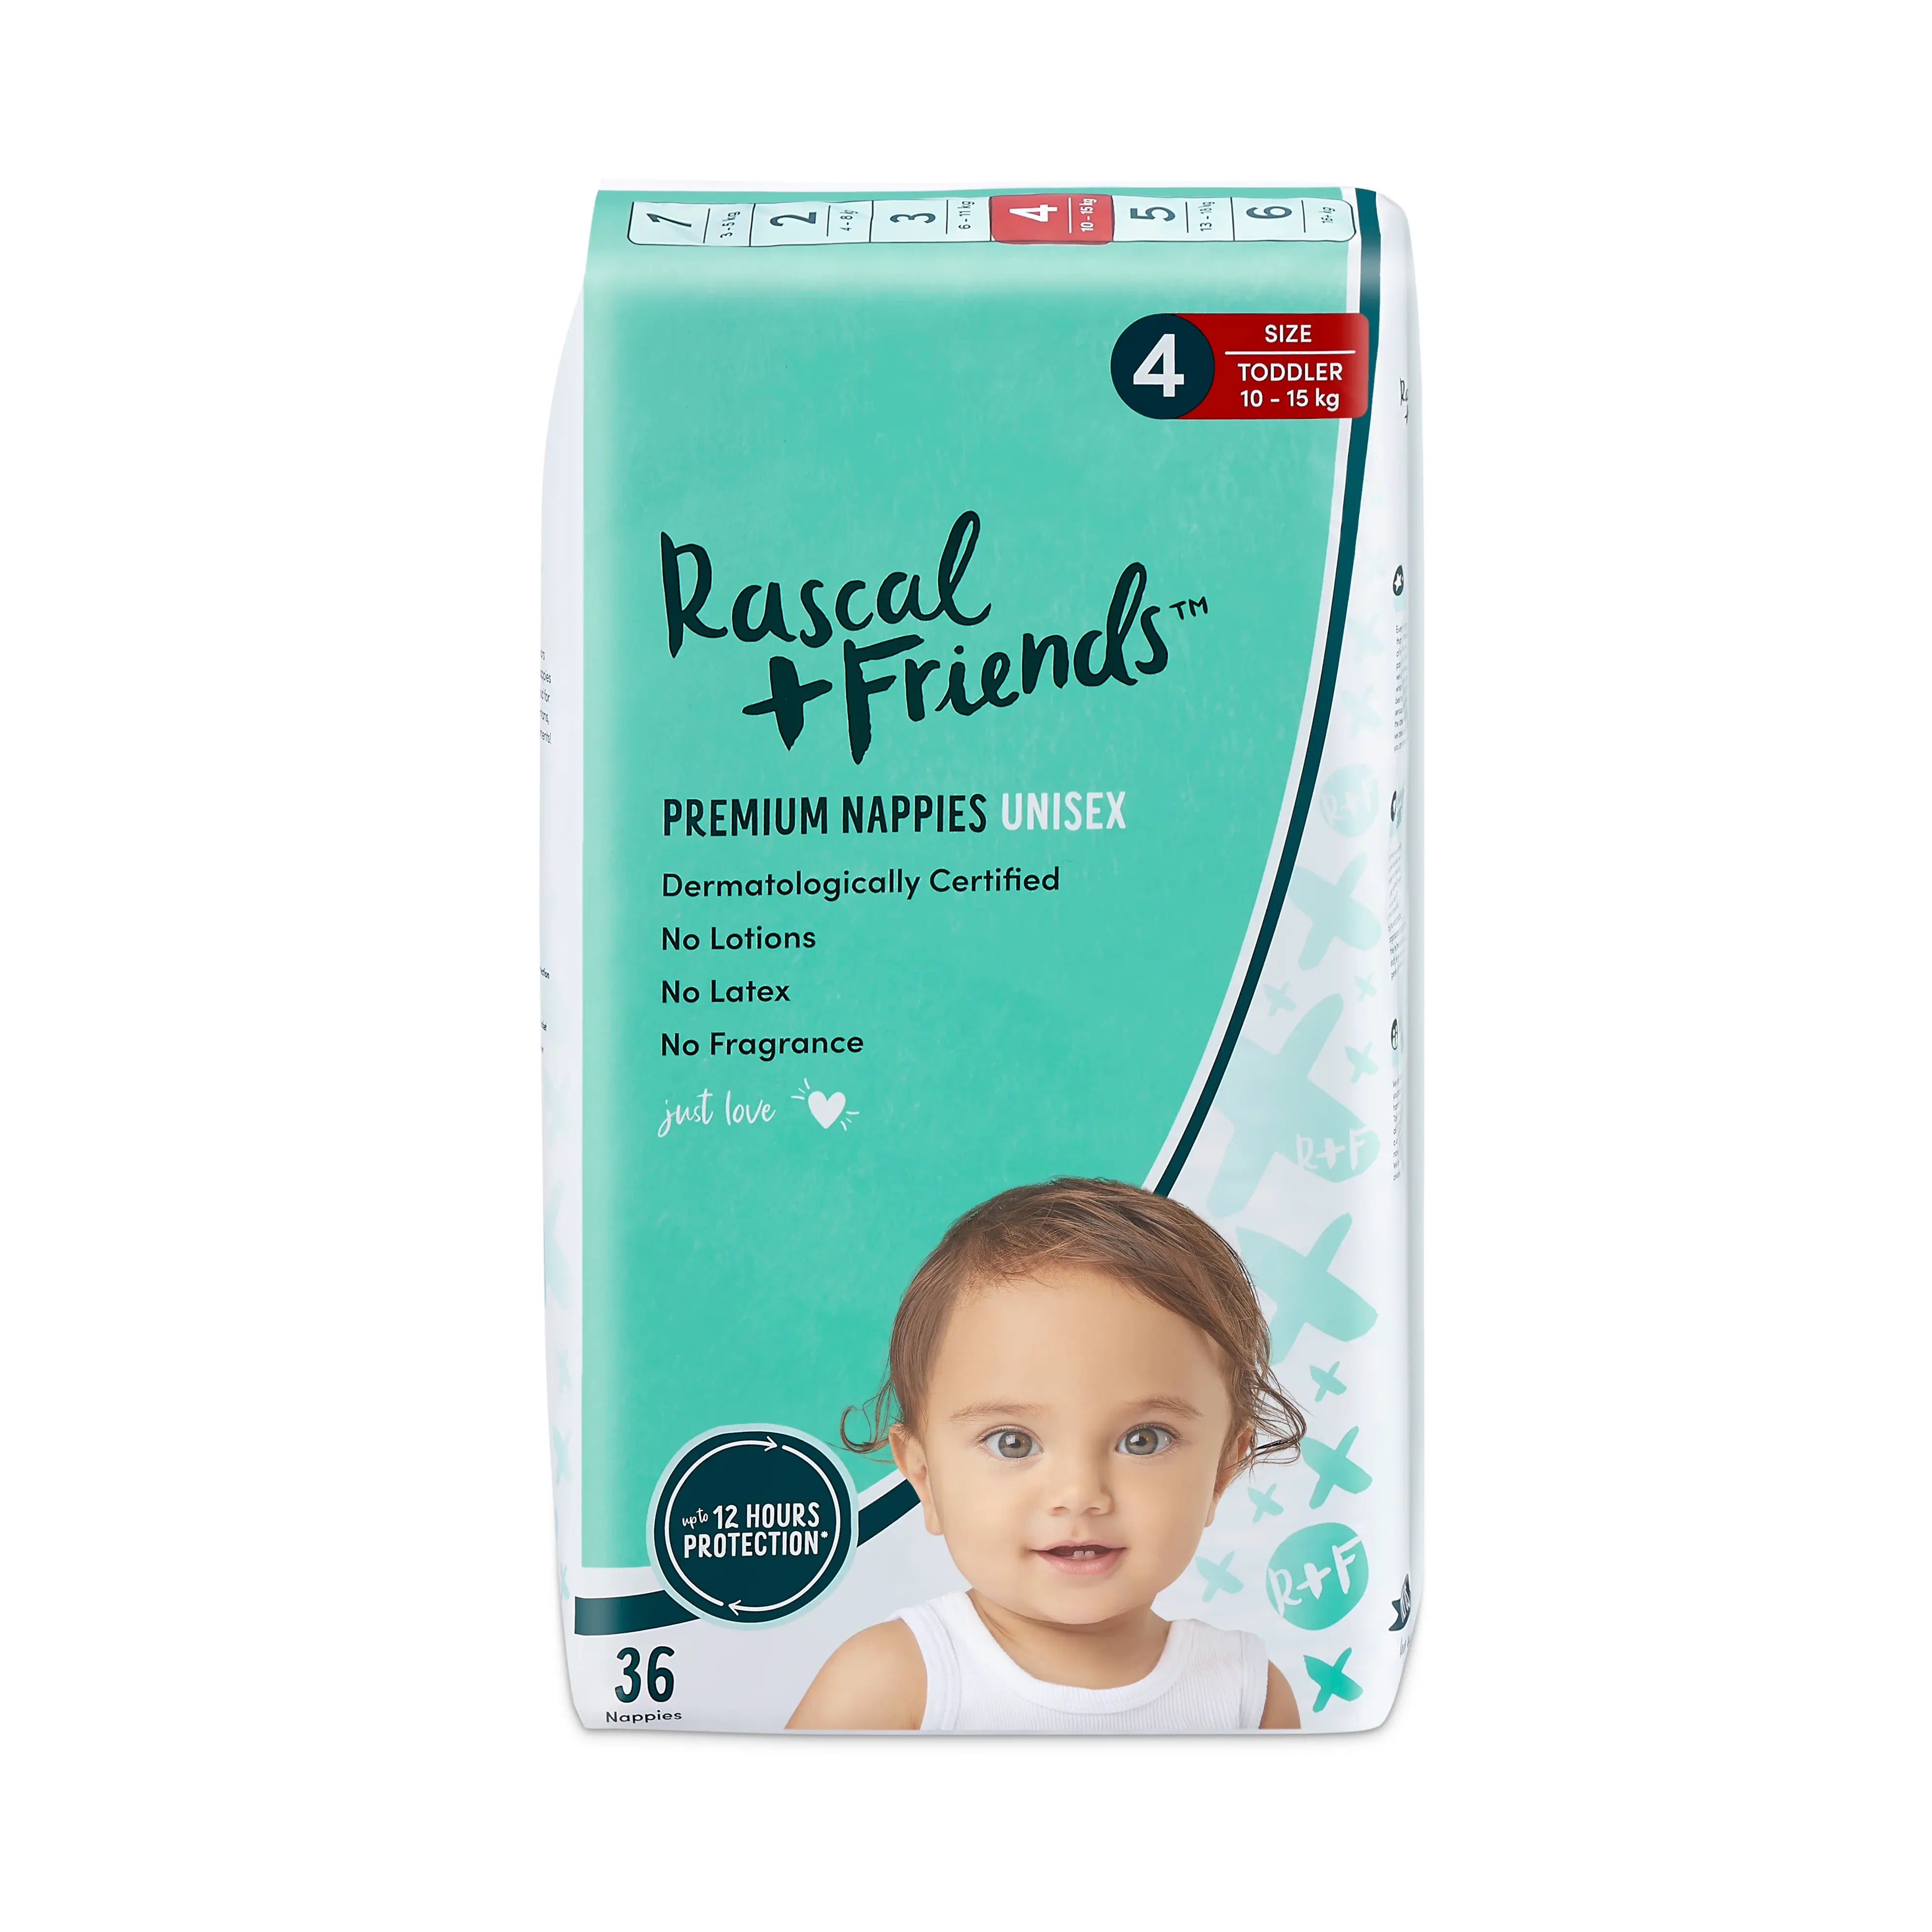 Rascal + Friends Premium Diapers, Size 1, 108 Count – Sidesv